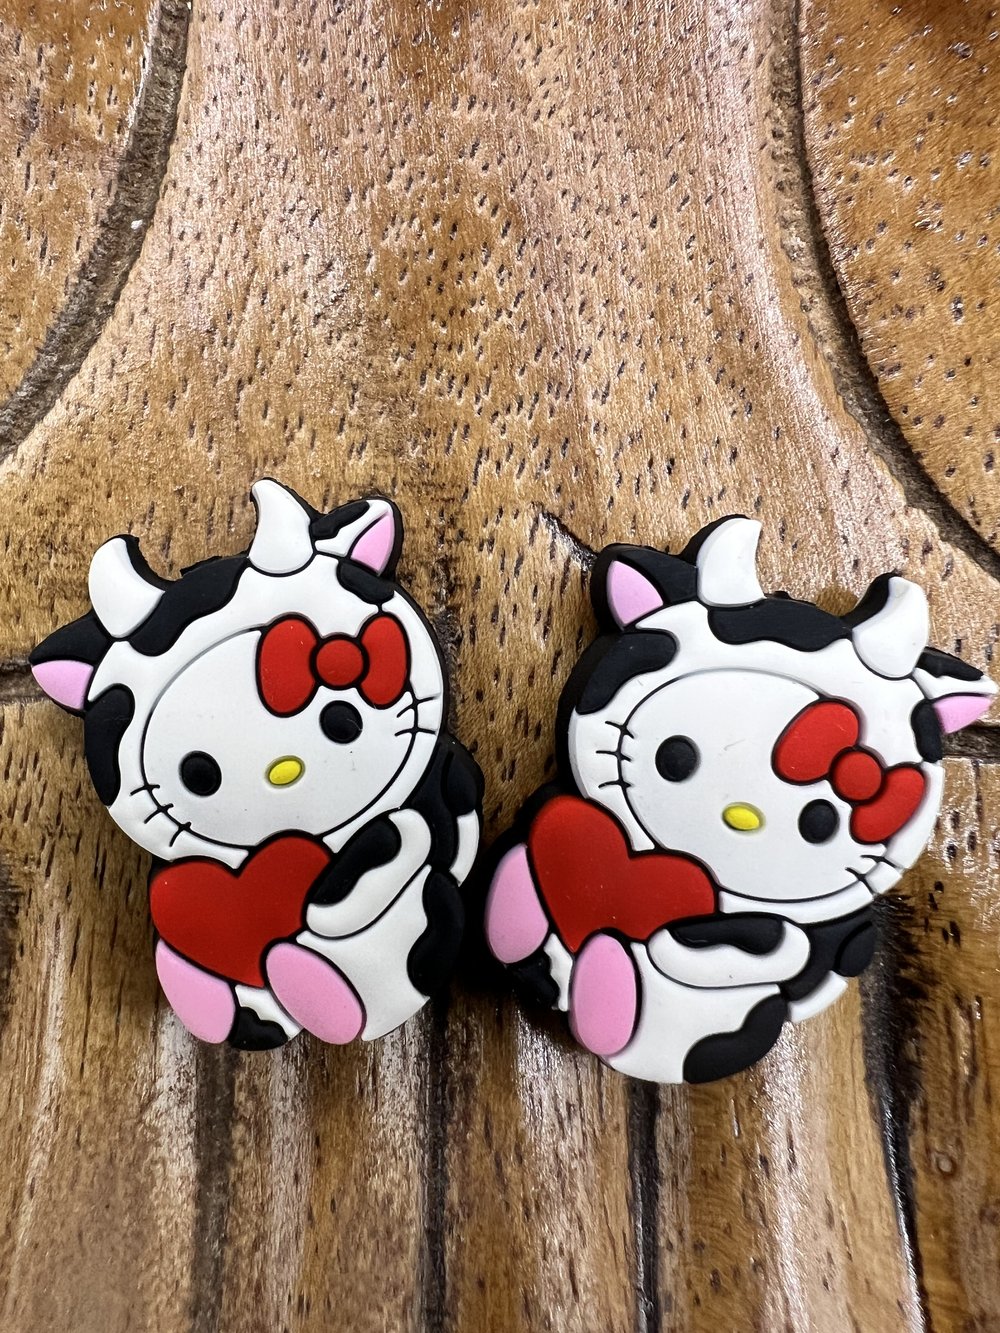 Buy Hello Kitty Beads for sale online